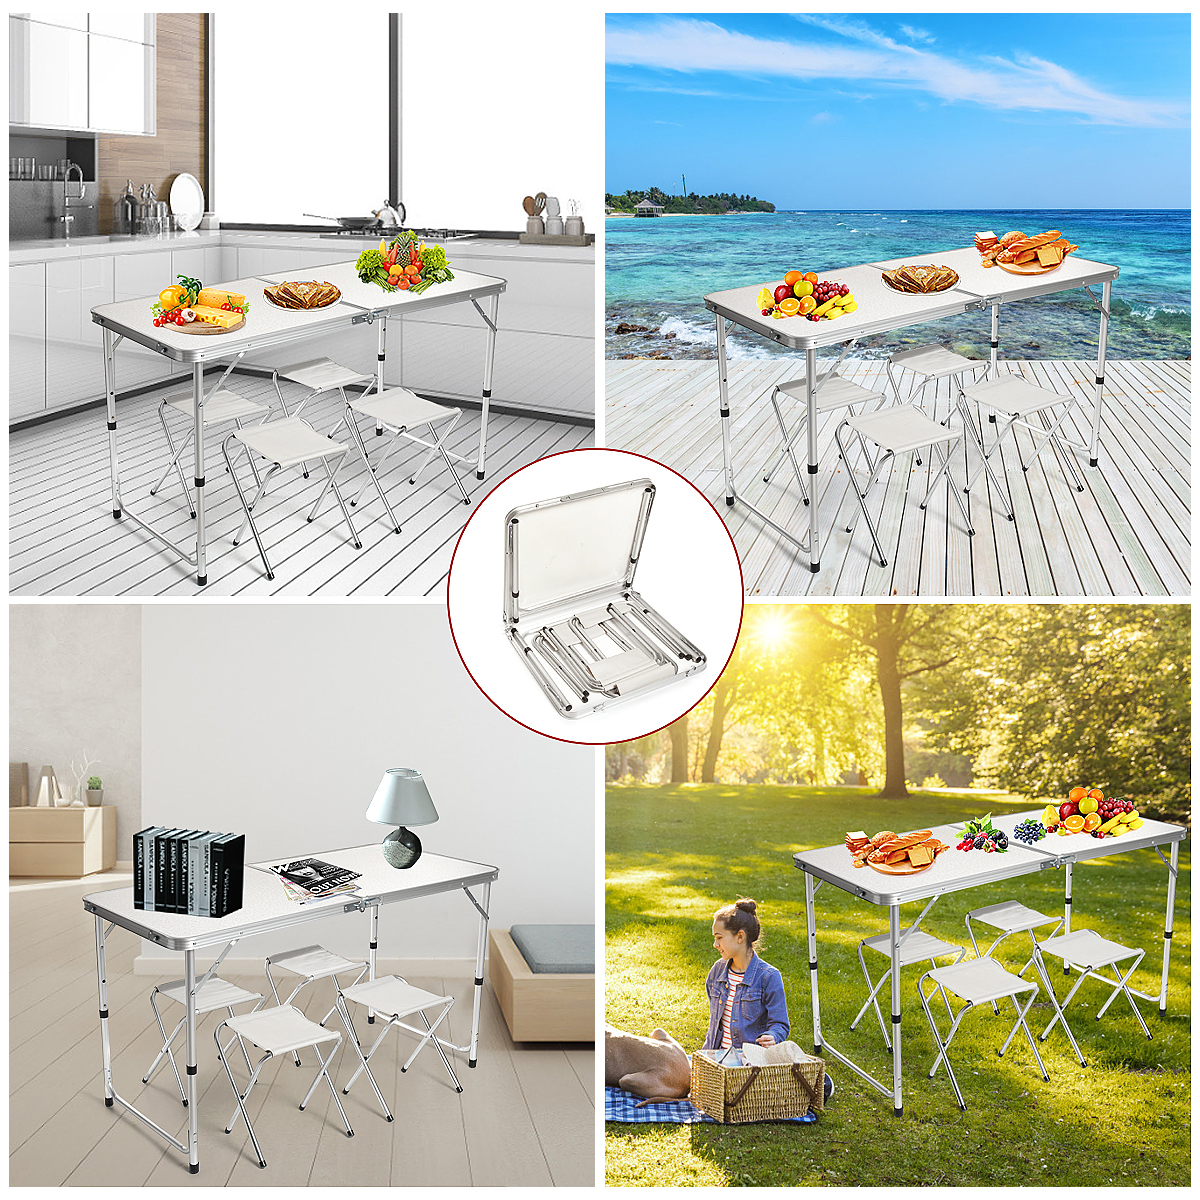 Folding Table 4ft Aluminum Camping Table Chair Set, Portable Picnic Card Table, Three Heights Adjustable Legs-47.24''x23.62'' - image 4 of 10